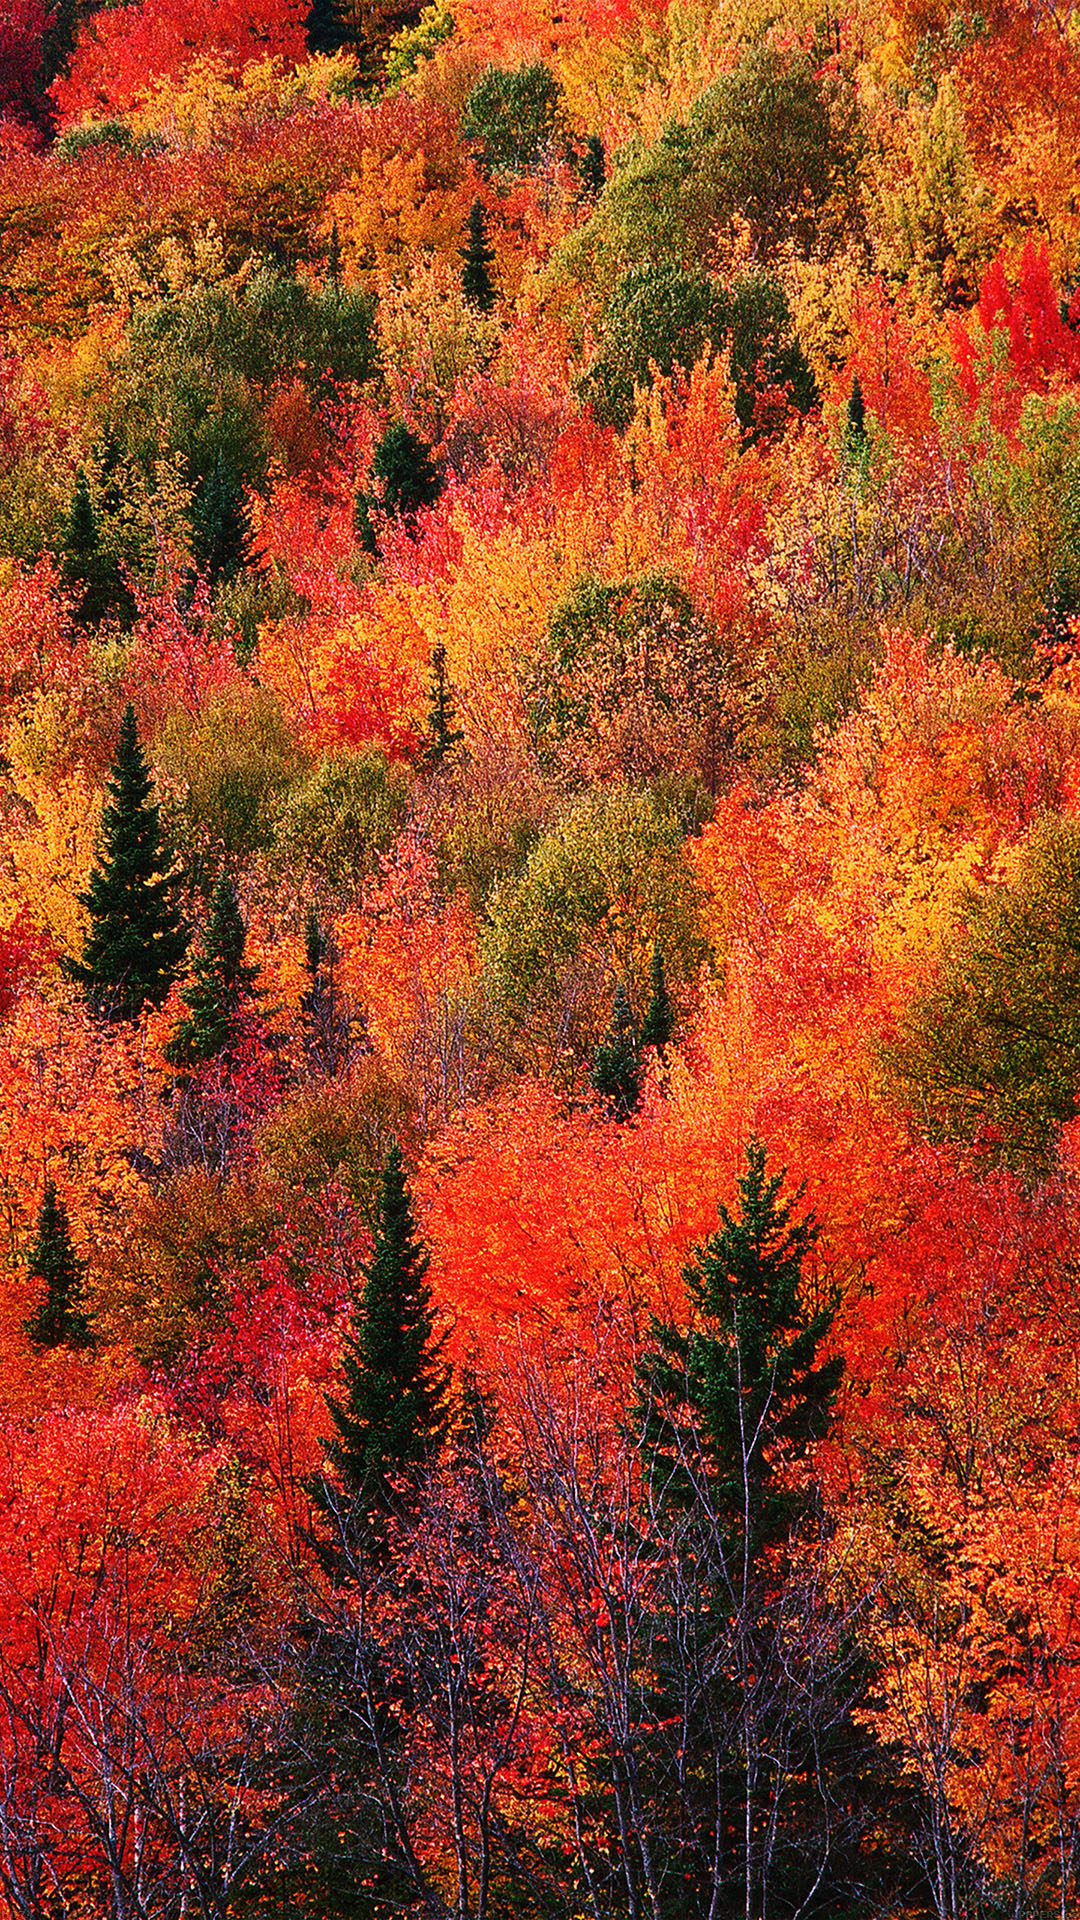 Breath Taking And Most Beautiful Fall Wallpaper For Your IPhone